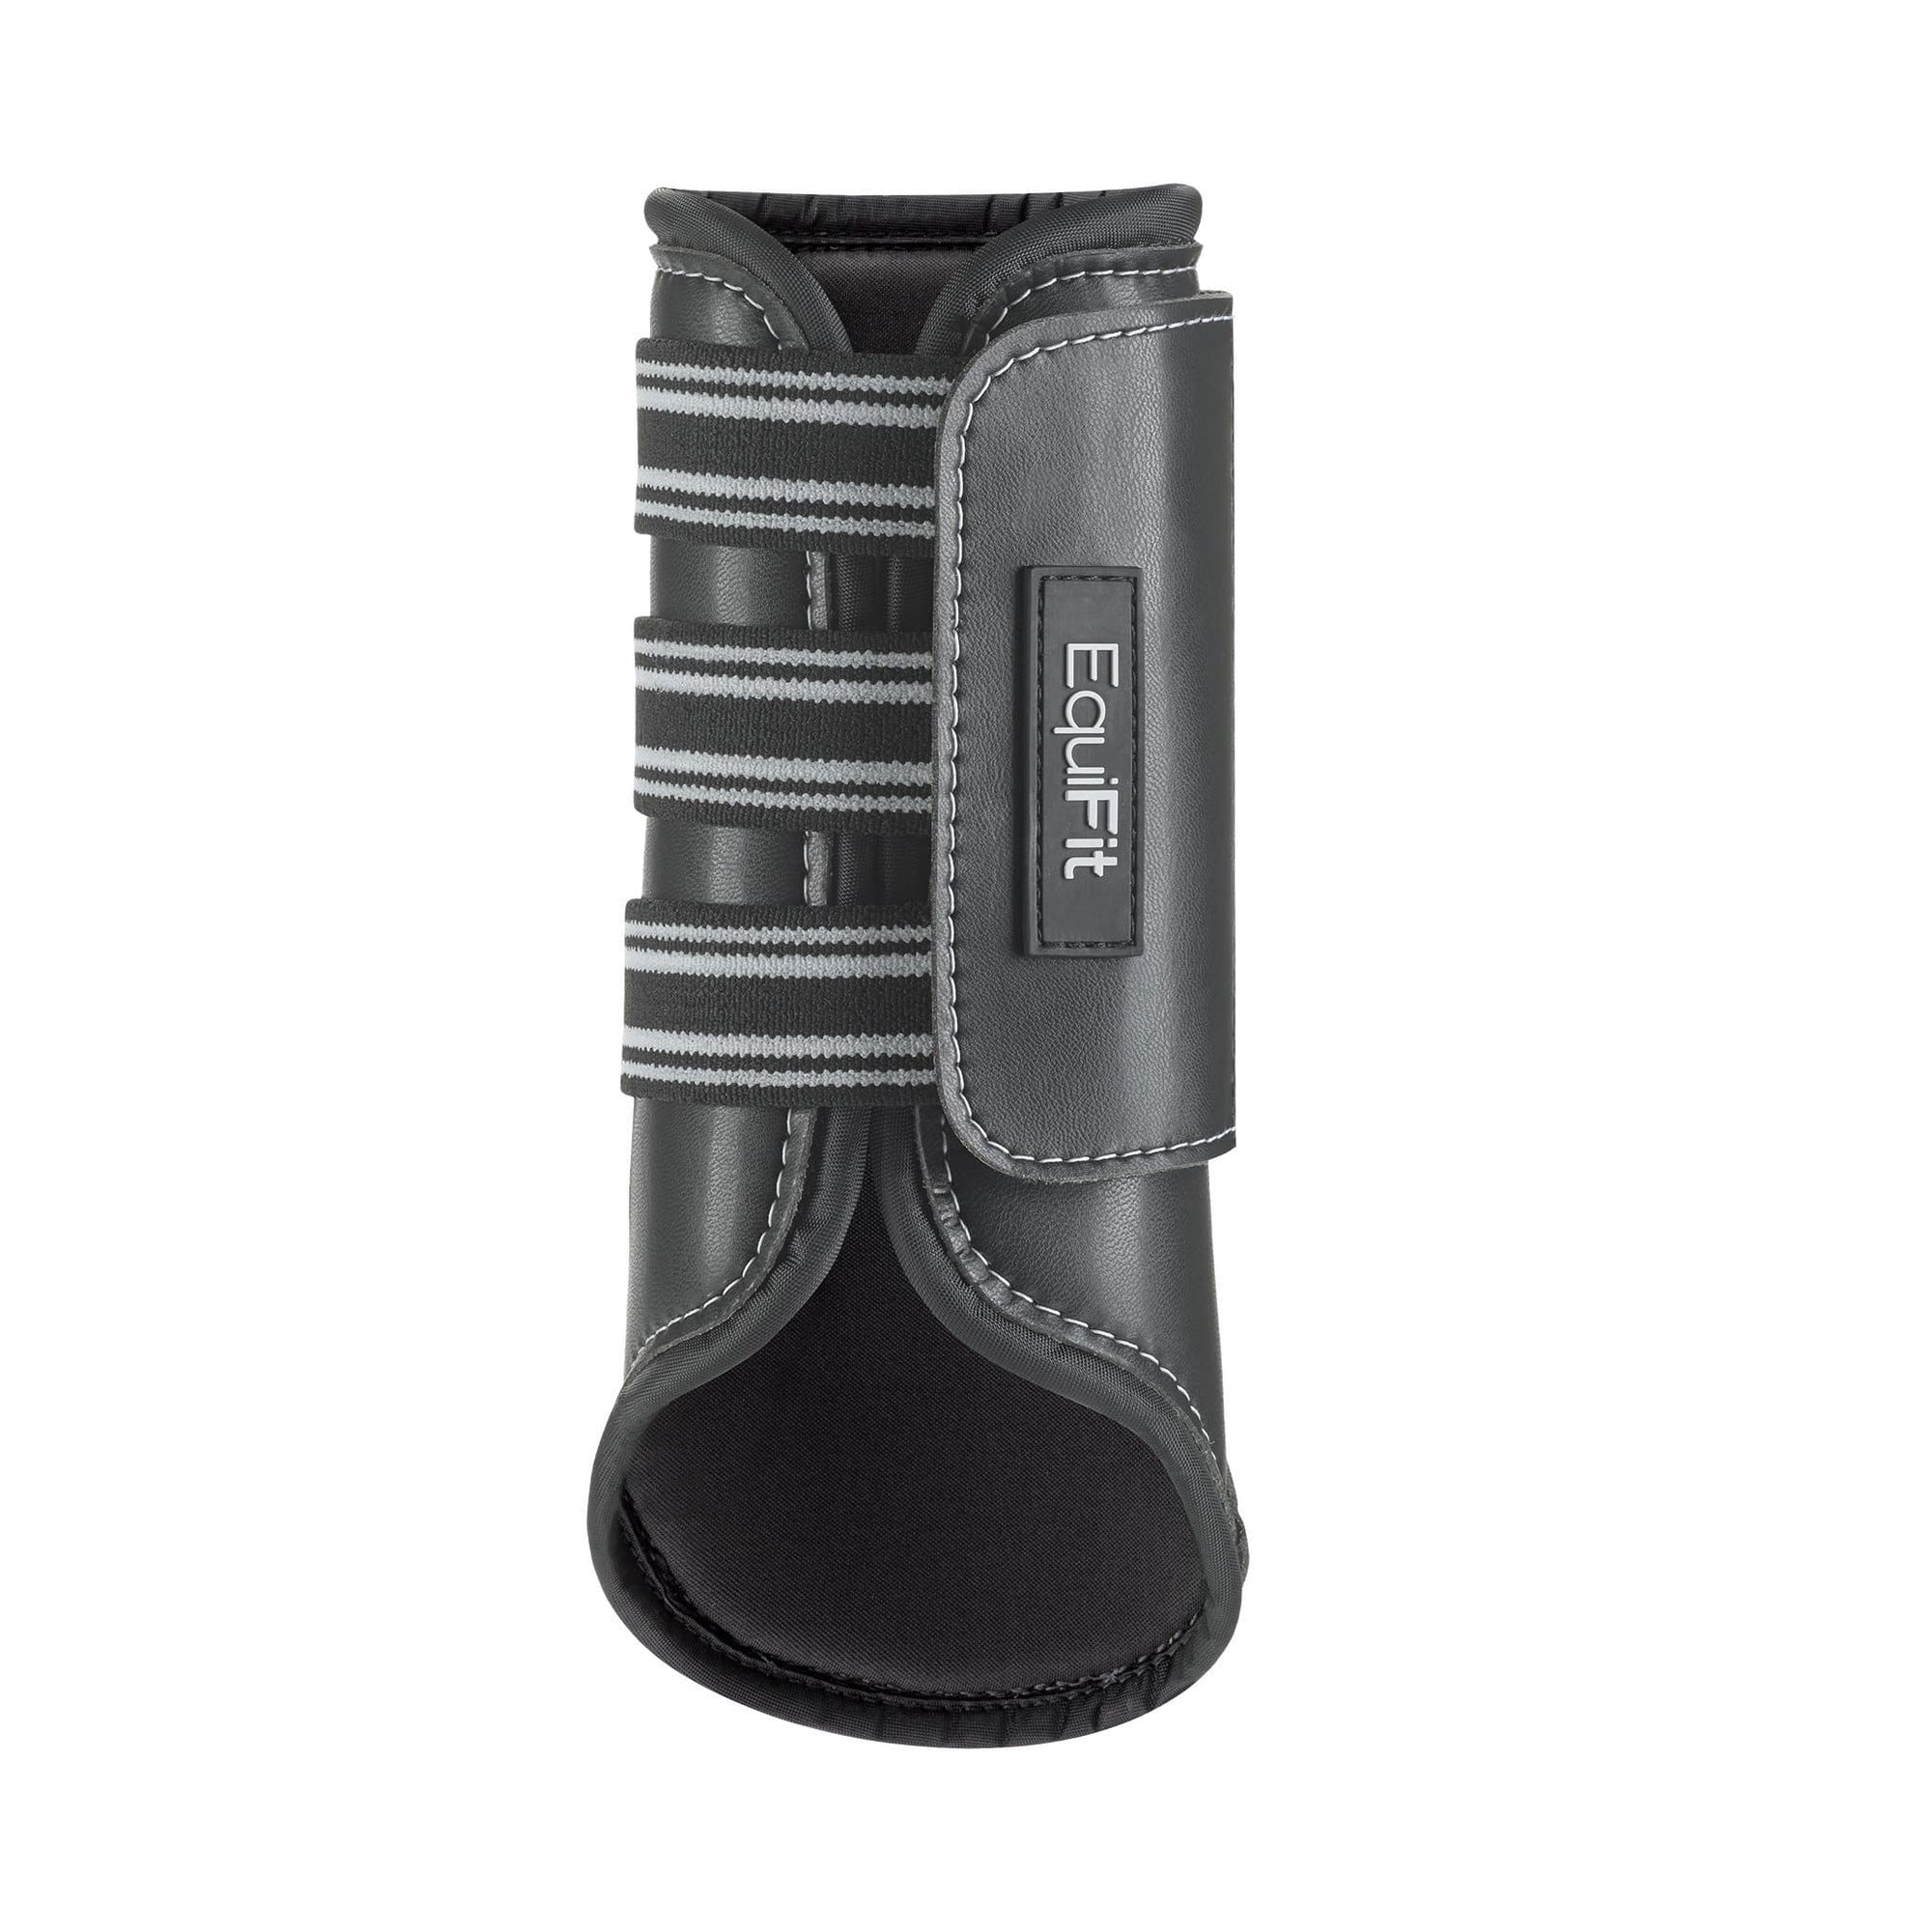 MultiTeq Front Boot with ImpacTeq Liner offers Full Coverage Protection, perfect for daily turnout and exercise